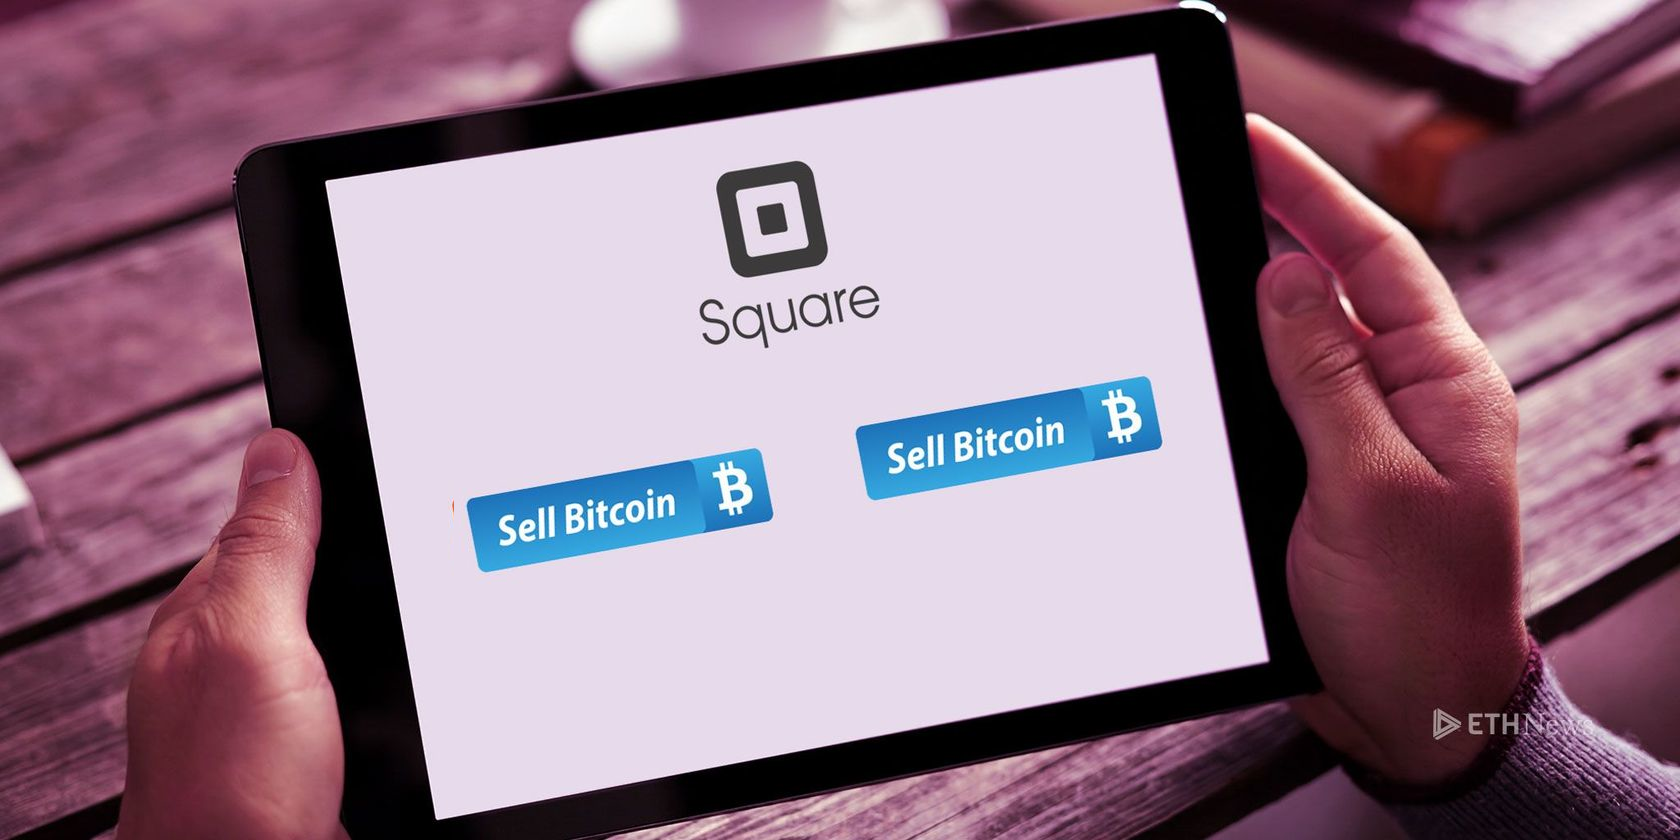 Square-Mobile-App-Cash-Allows-Bitcoin-Buying-And-Selling-11-16-2017-2048x1024.png